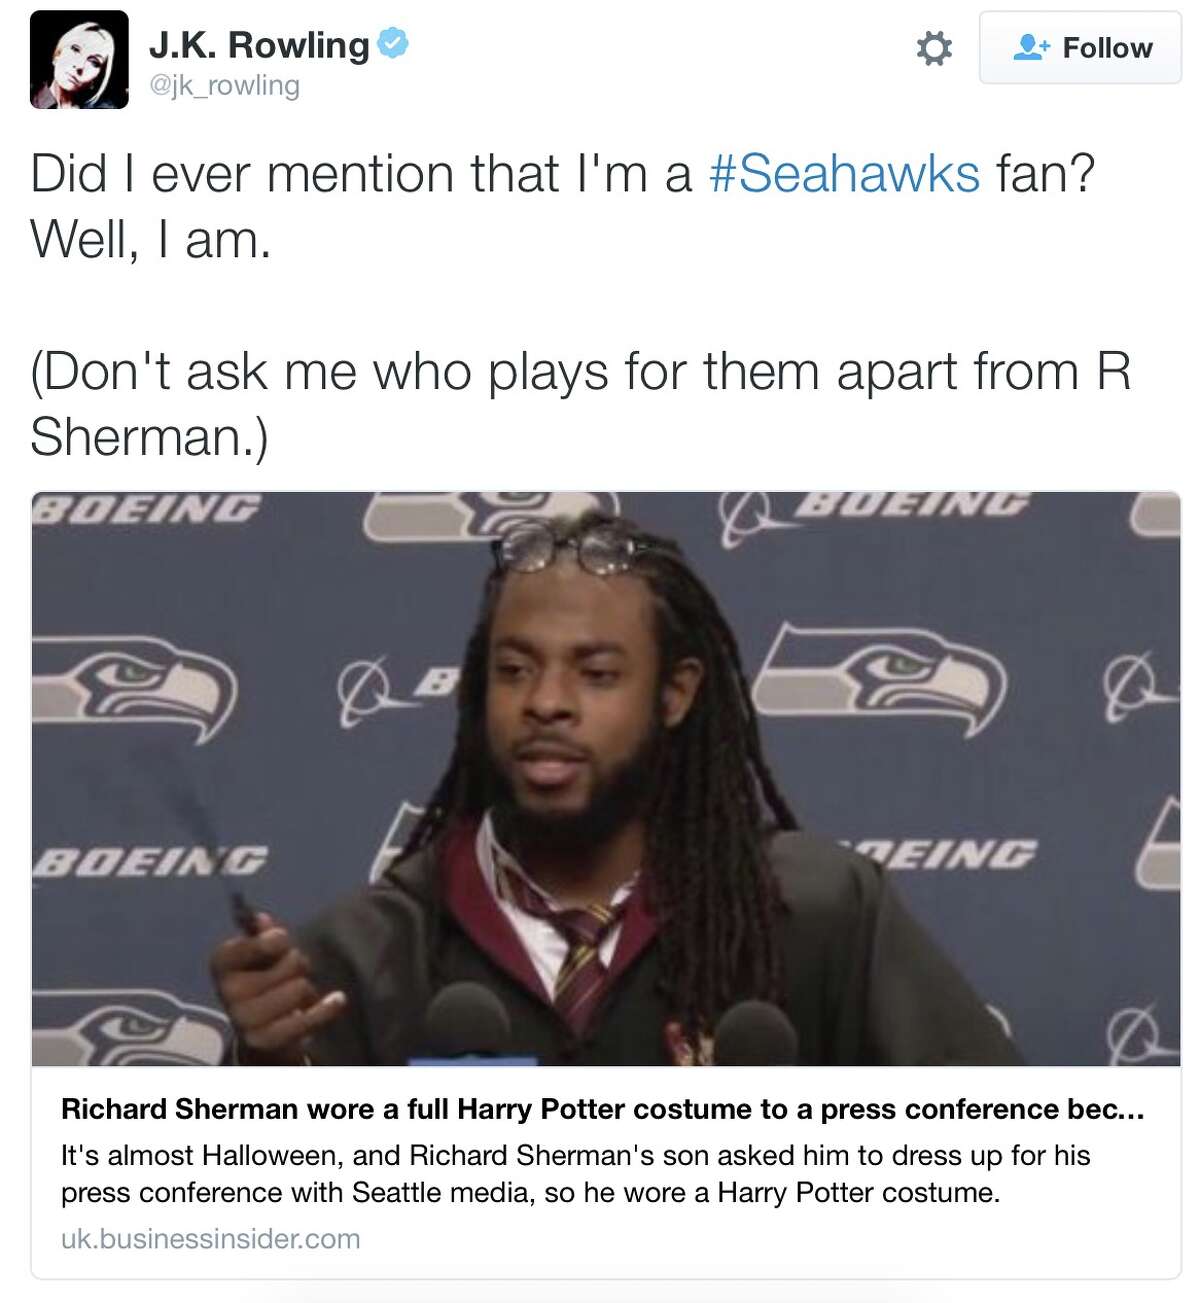 J.K. Rowling declared publicly that she is a Seahawks fan ... but one wonders if perhaps she was under Mr. Sherman's spell. But her declaration got us to wondering which other celebs are or are rumored to be Seahawks fans? From her Twitter feed.